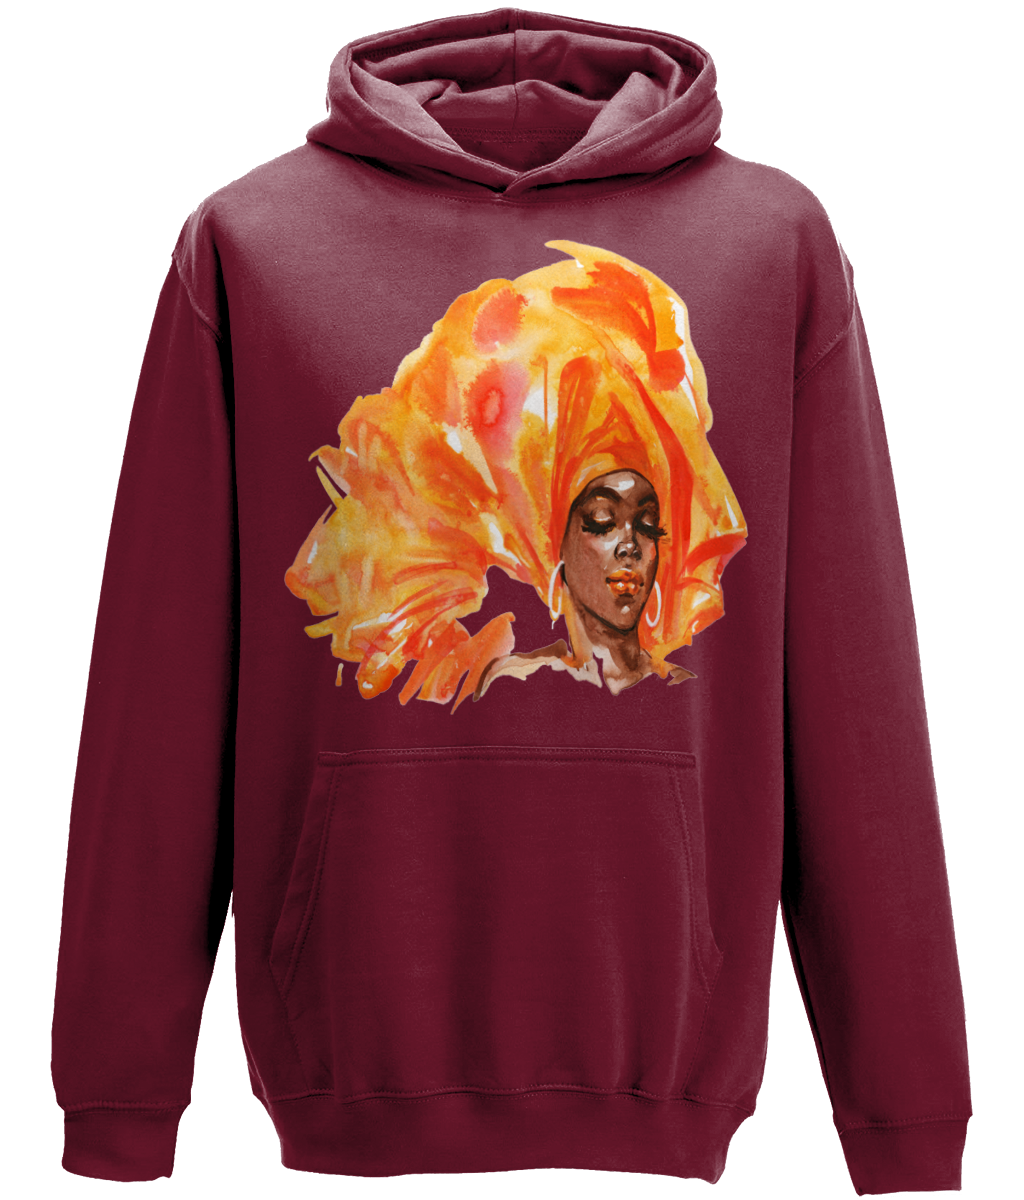 Black Woman in Orange Headwrap - Hoodie  - Various Colours Available - FAST UK DELIVERY